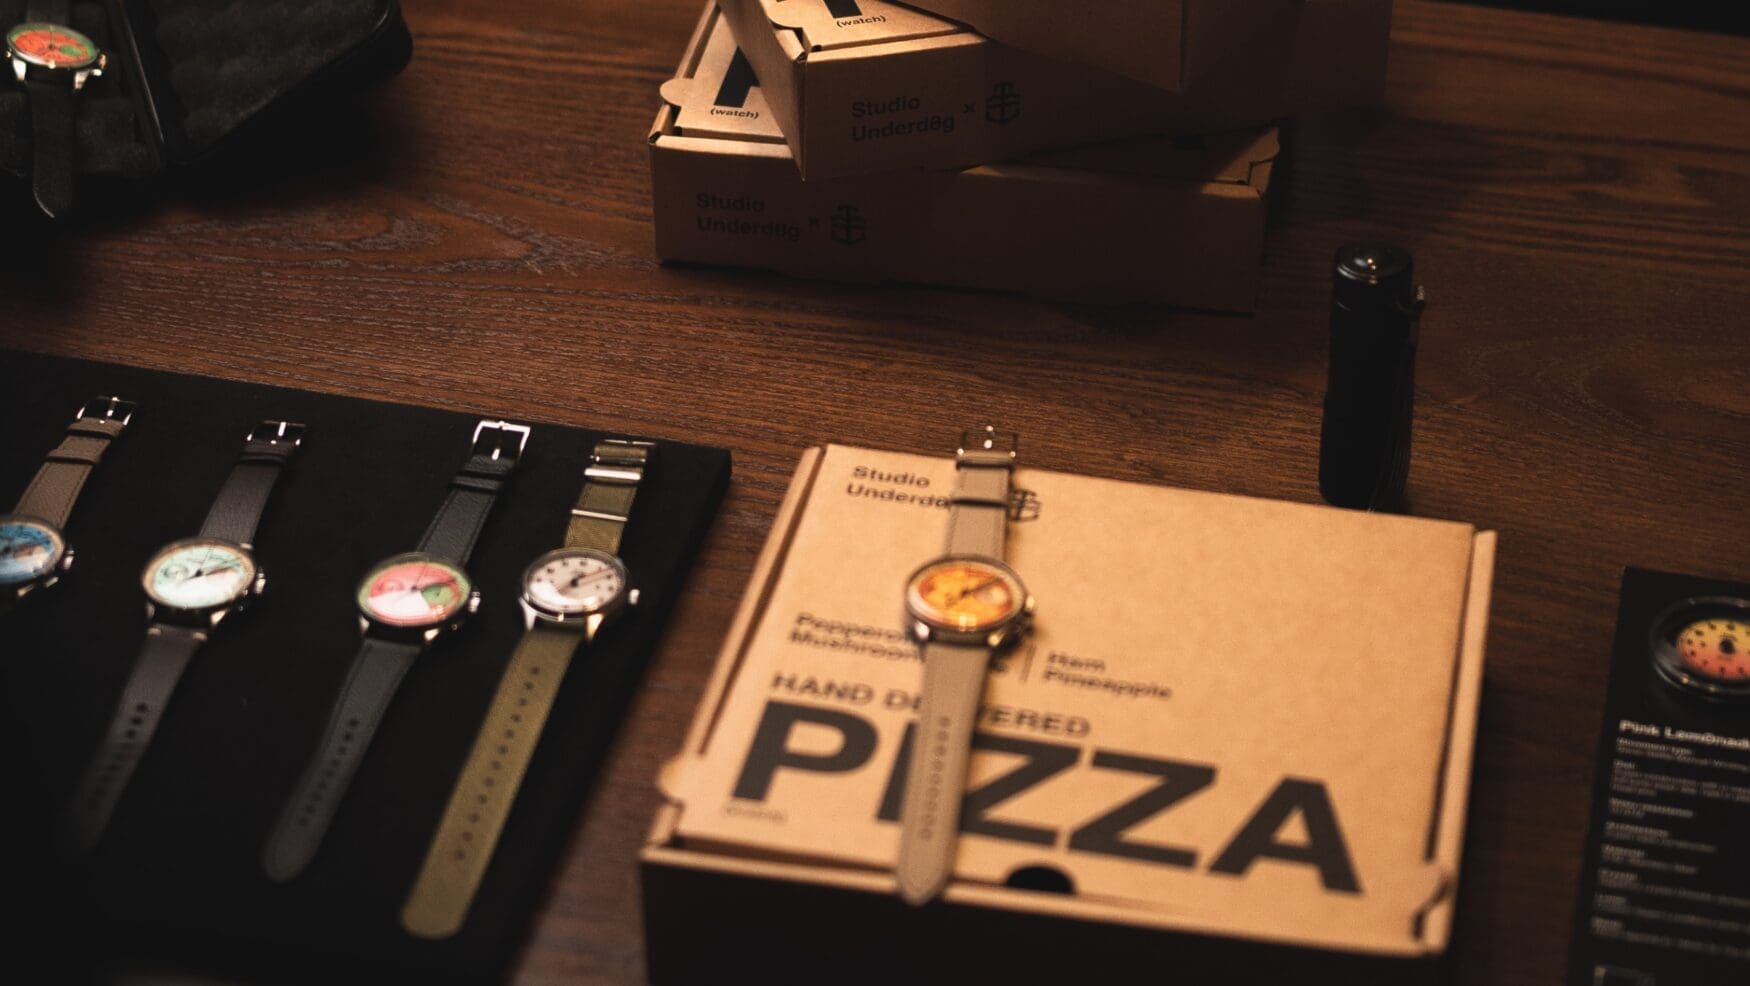 Studio Underd0g’s first British ‘Hand Delivered’ pizza party had watch fans asking for seconds